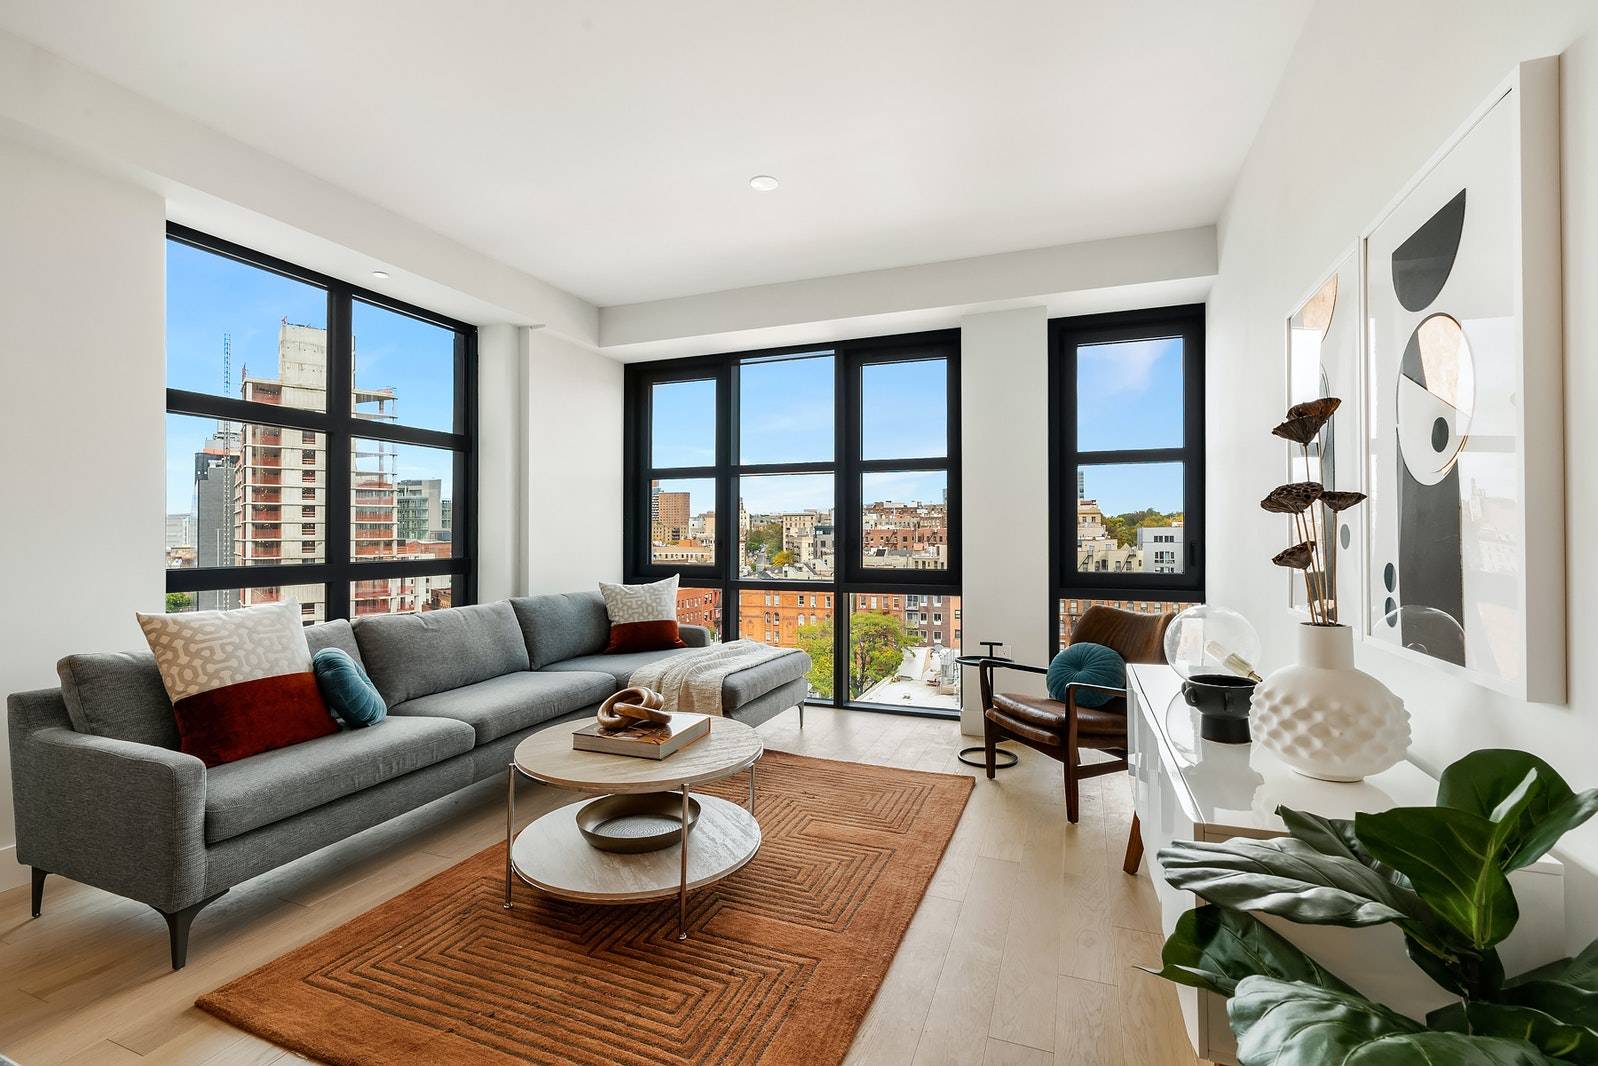 This ninth floor home is well proportioned, offering ample entertaining space and a separate bedroom suite.